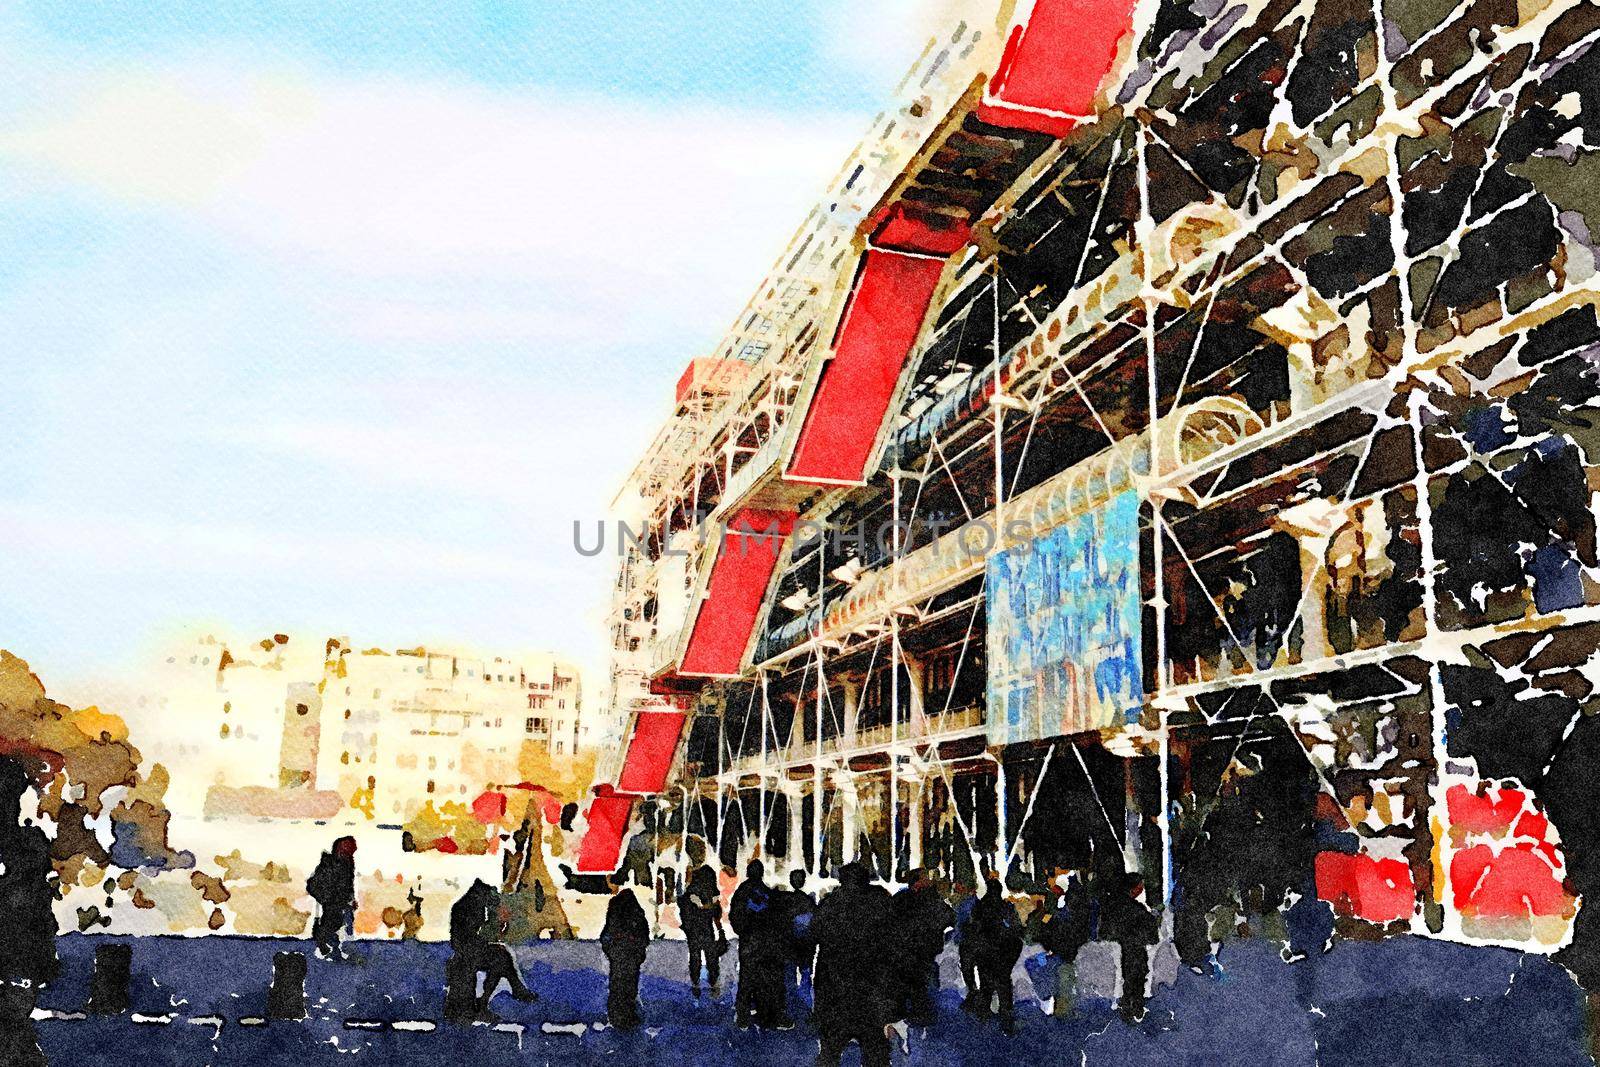 watercolor of a facade of the center pompidou in Paris on an autumn day